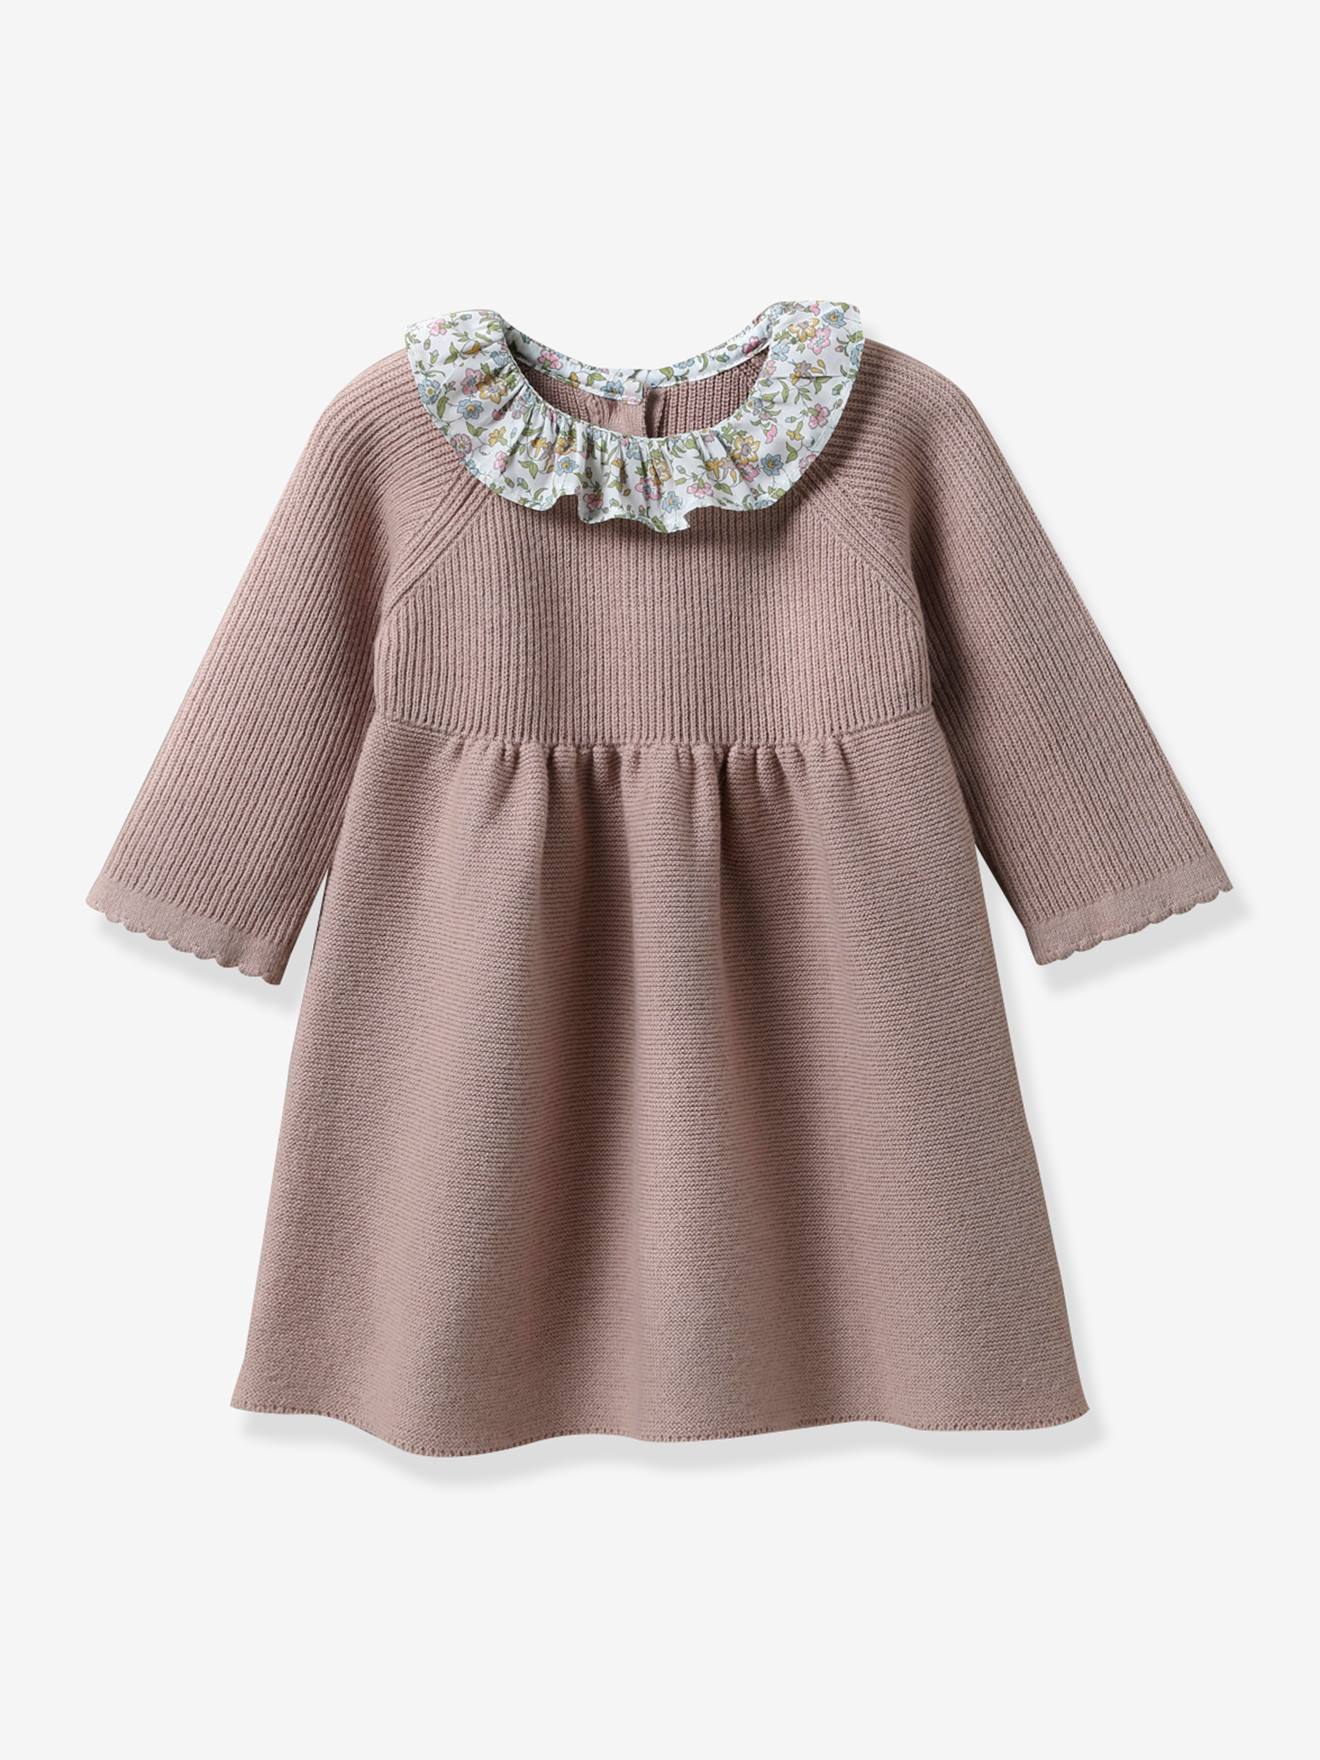 Knitted Dress with Collar in Liberty(r) Fabric, by CYRILLUS for Babies rose